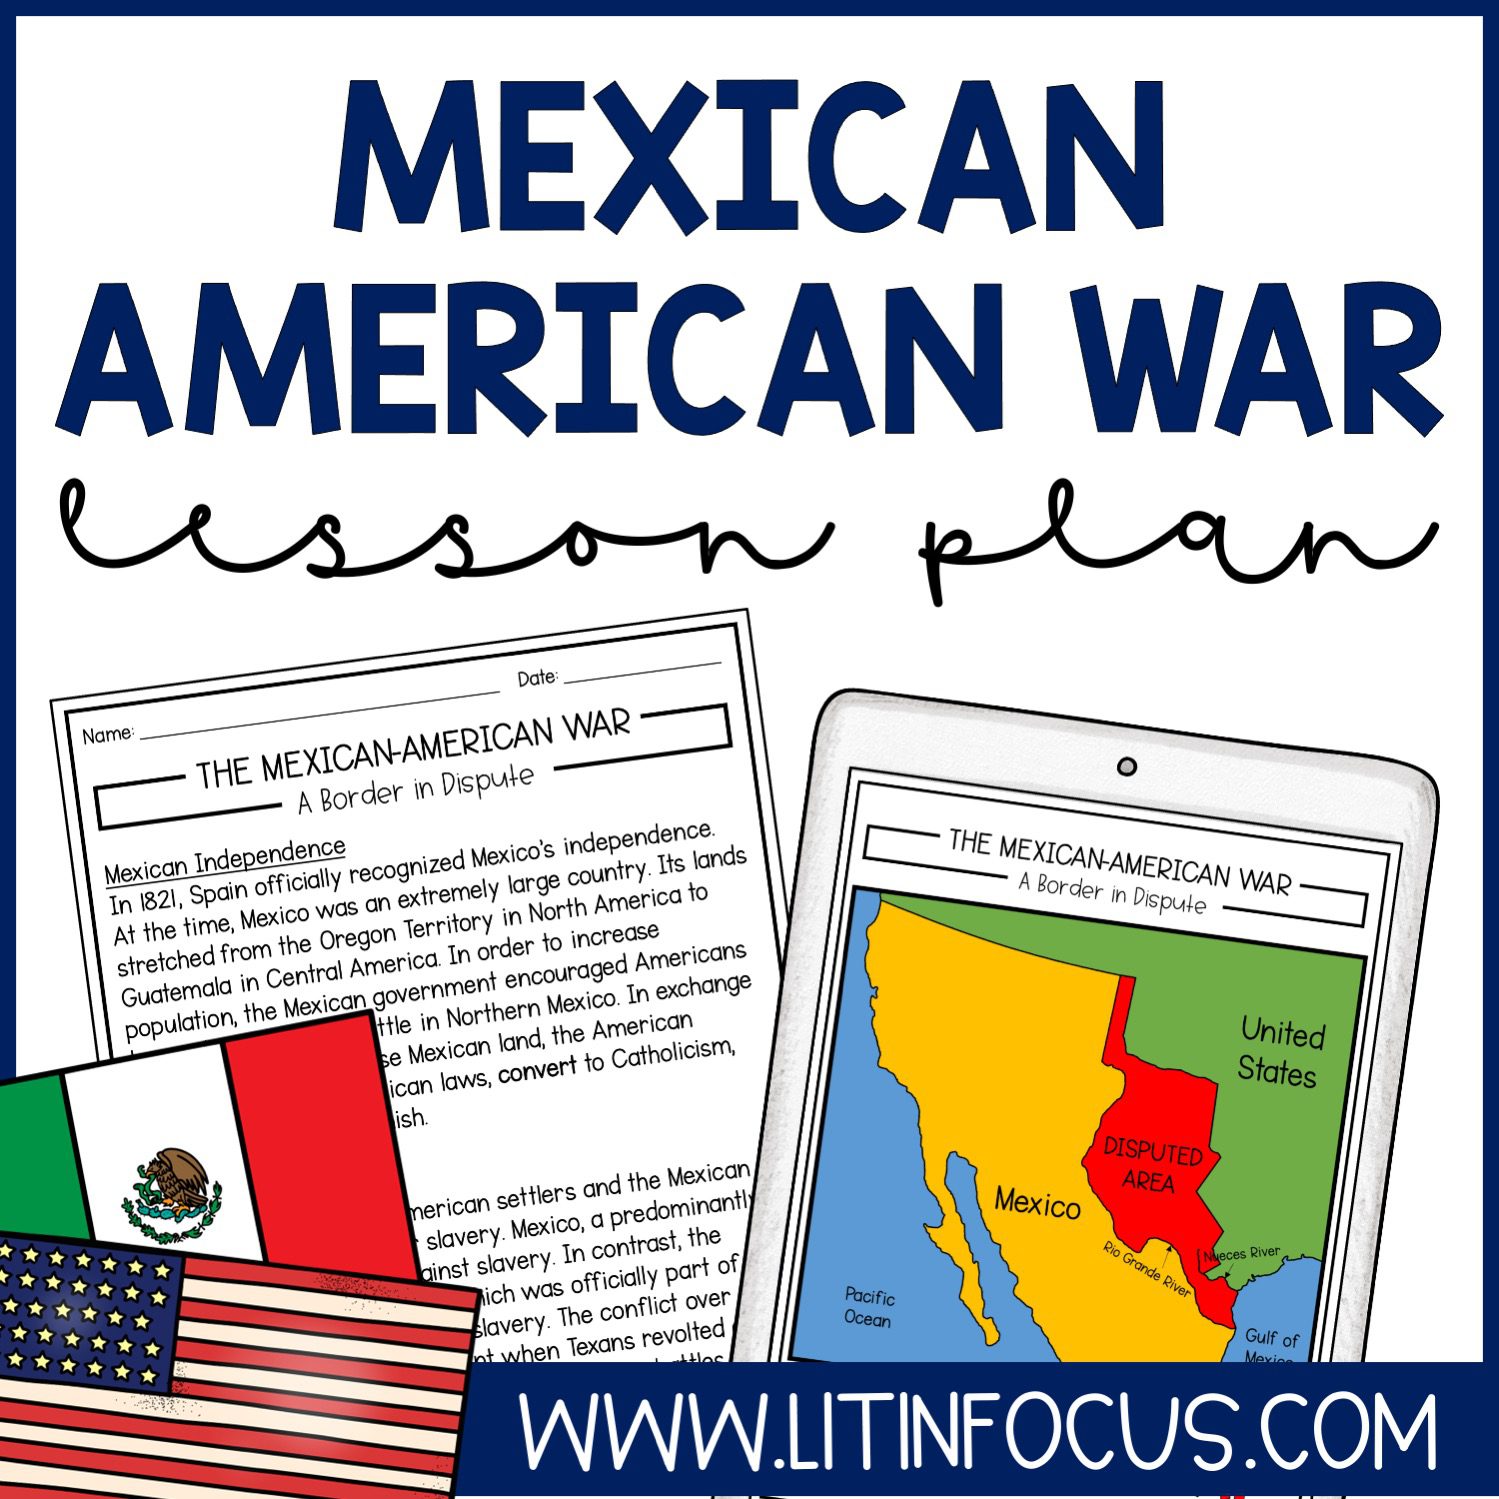 MEXICAN american war lesson plan for upper elementary and middle school